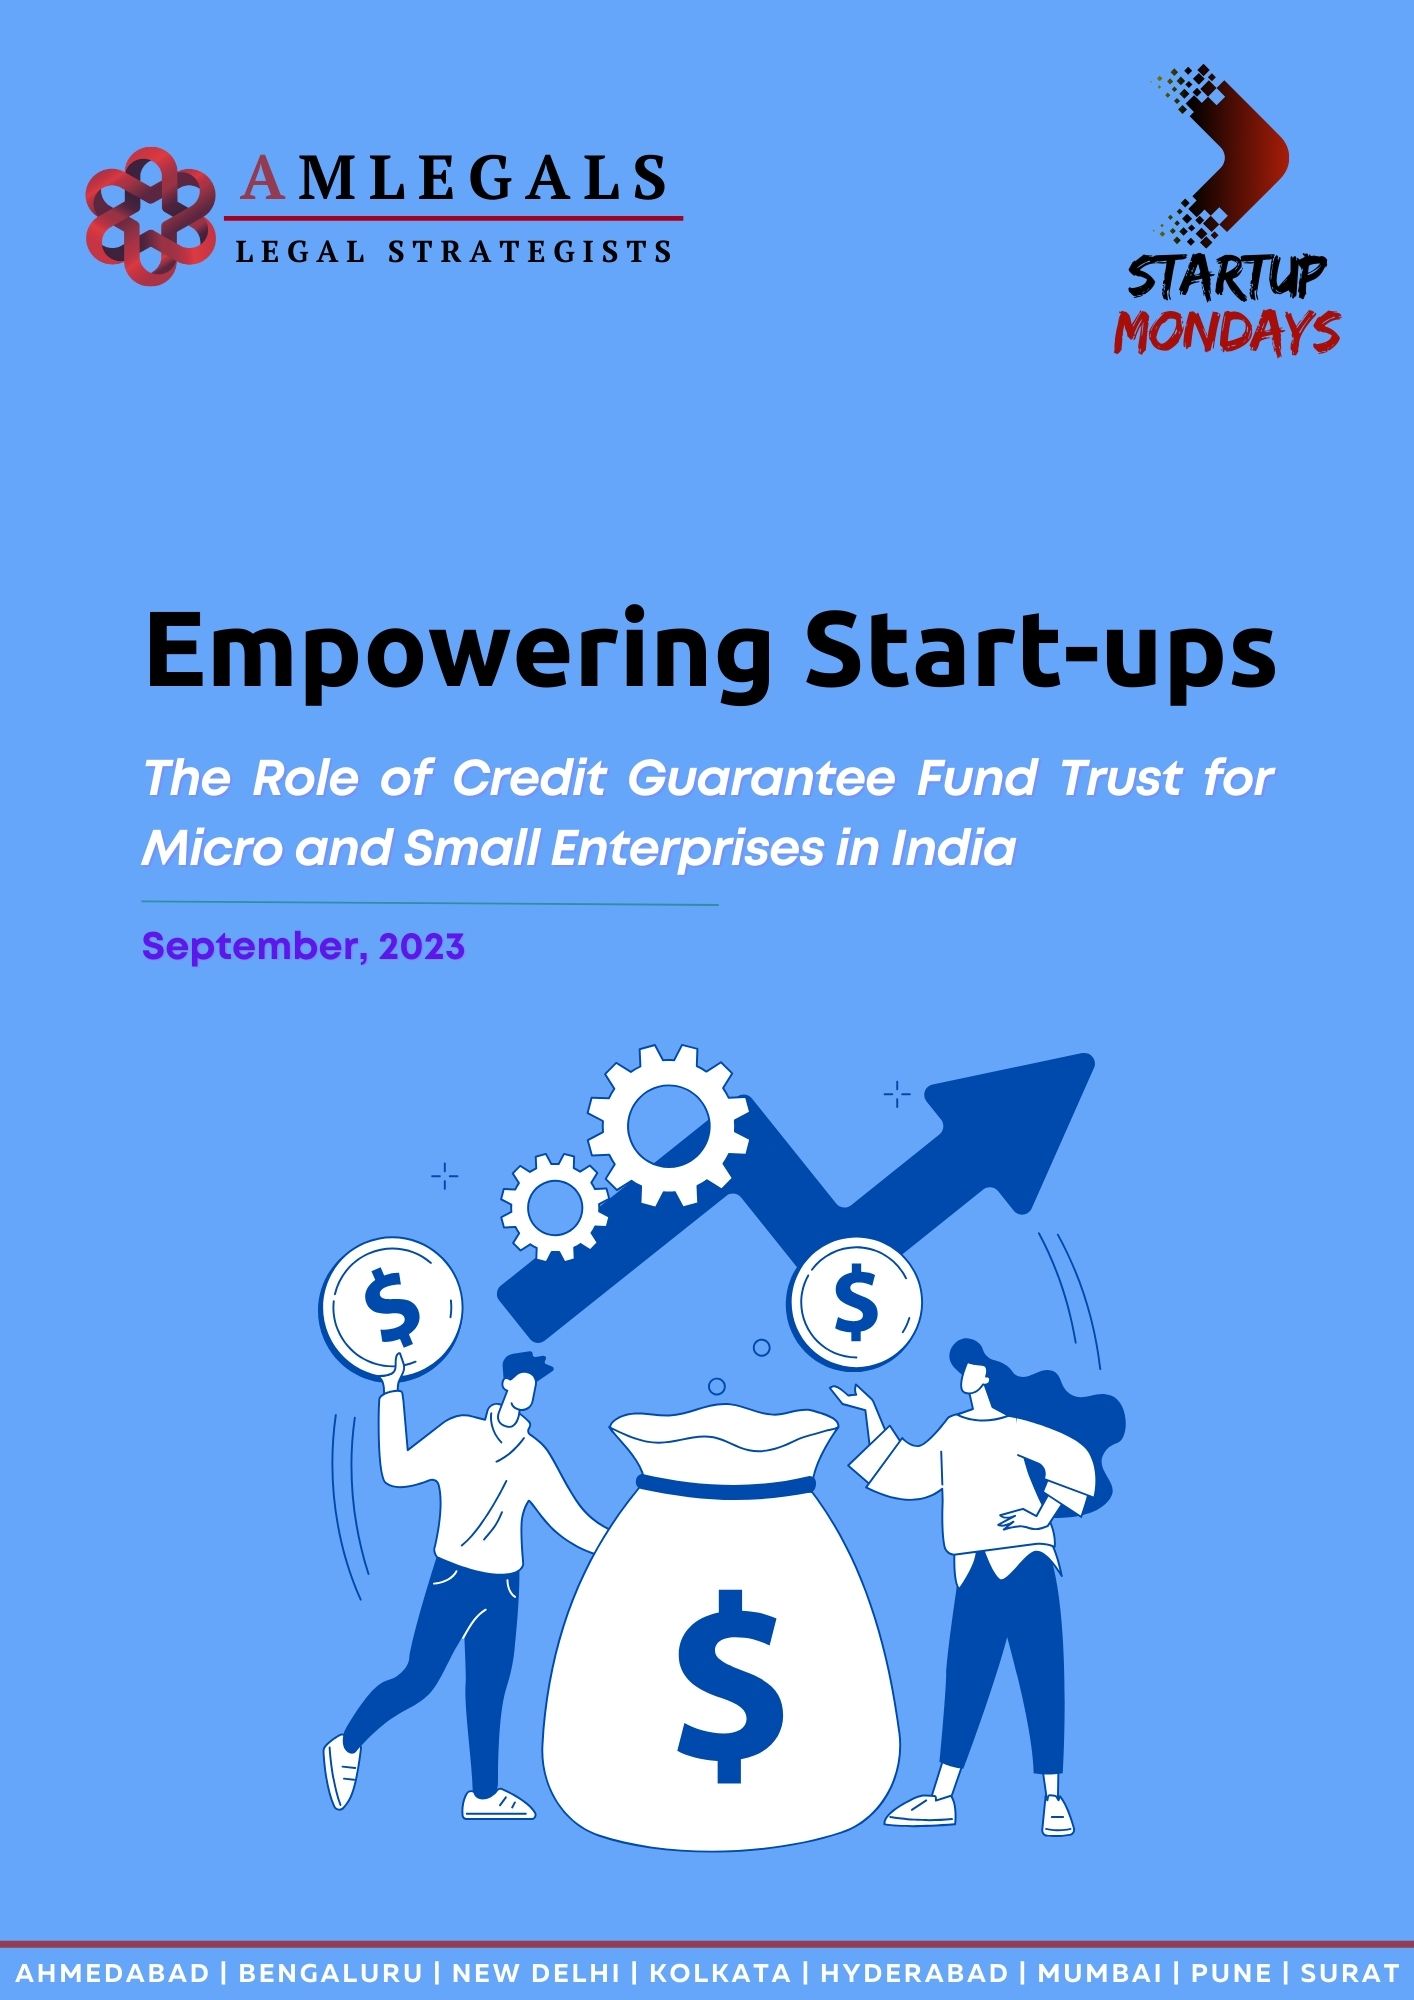 The Role of Credit Guarantee Fund Trust for Micro and Small Enterprises in India